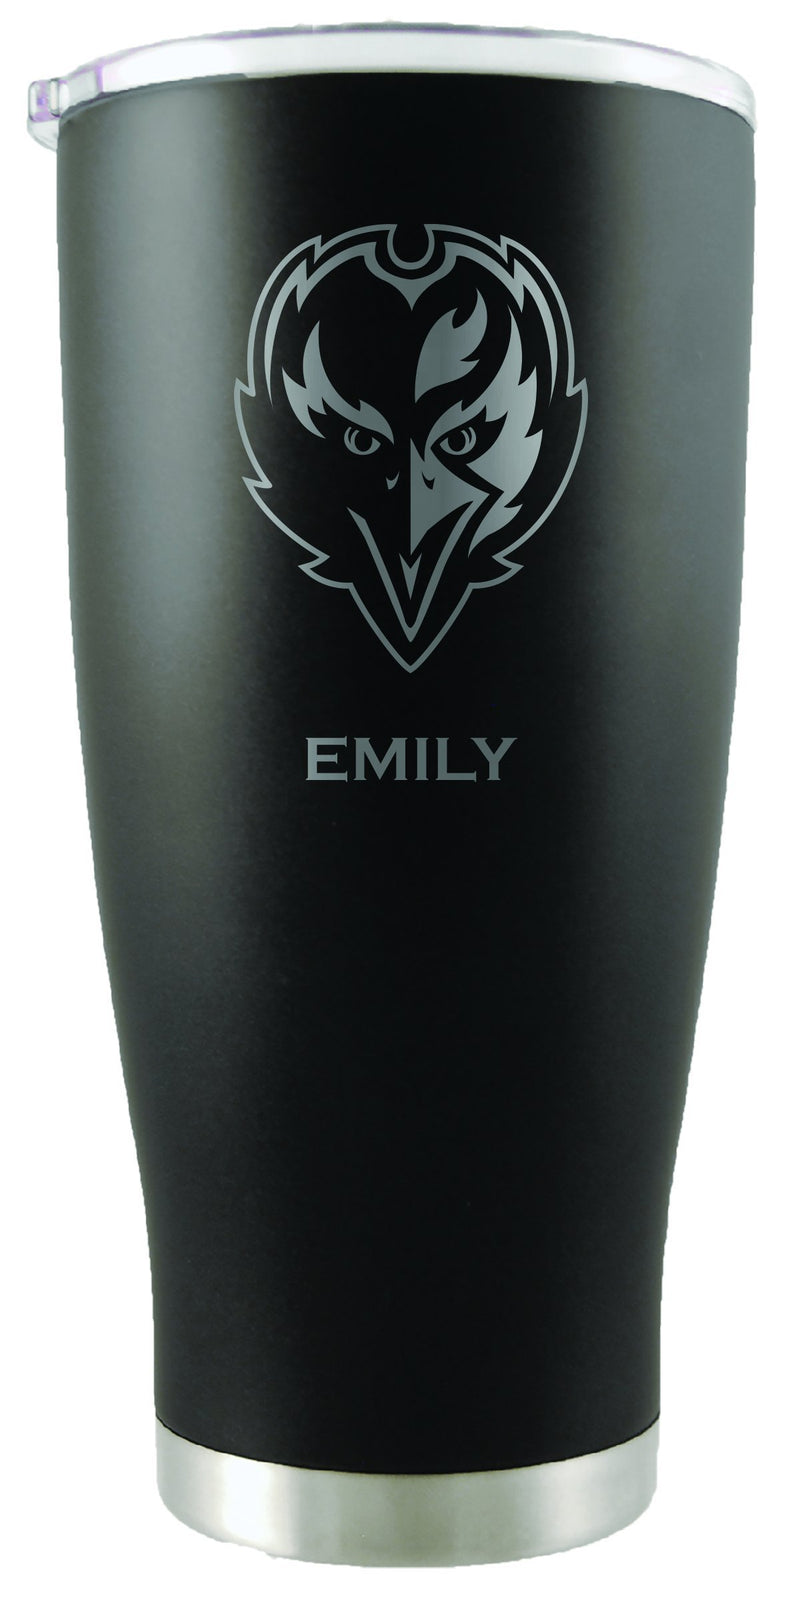 20oz Black Personalized Stainless-Steel Tumbler | Baltimore Ravens
Baltimore Ravens, BRA, CurrentProduct, Drinkware_category_All, NFL, Personalized_Personalized, Stainless Steel
The Memory Company